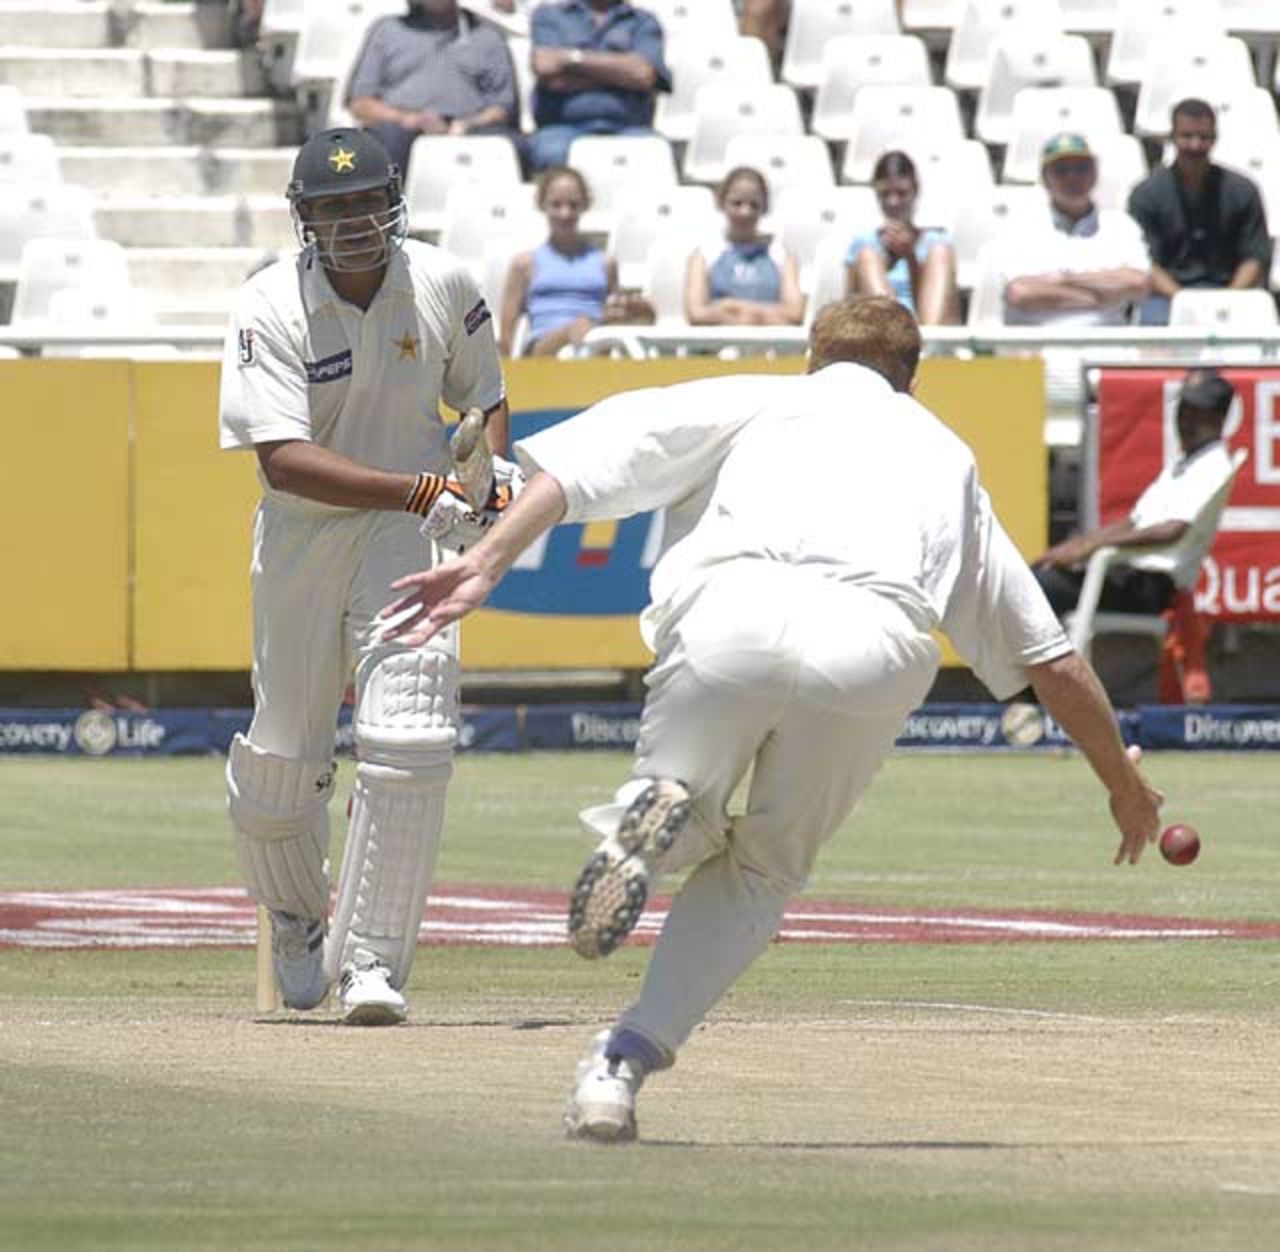 Shaun Pollock trying to field of his own bowling as Inzamam-Ul-Haq plays defensively